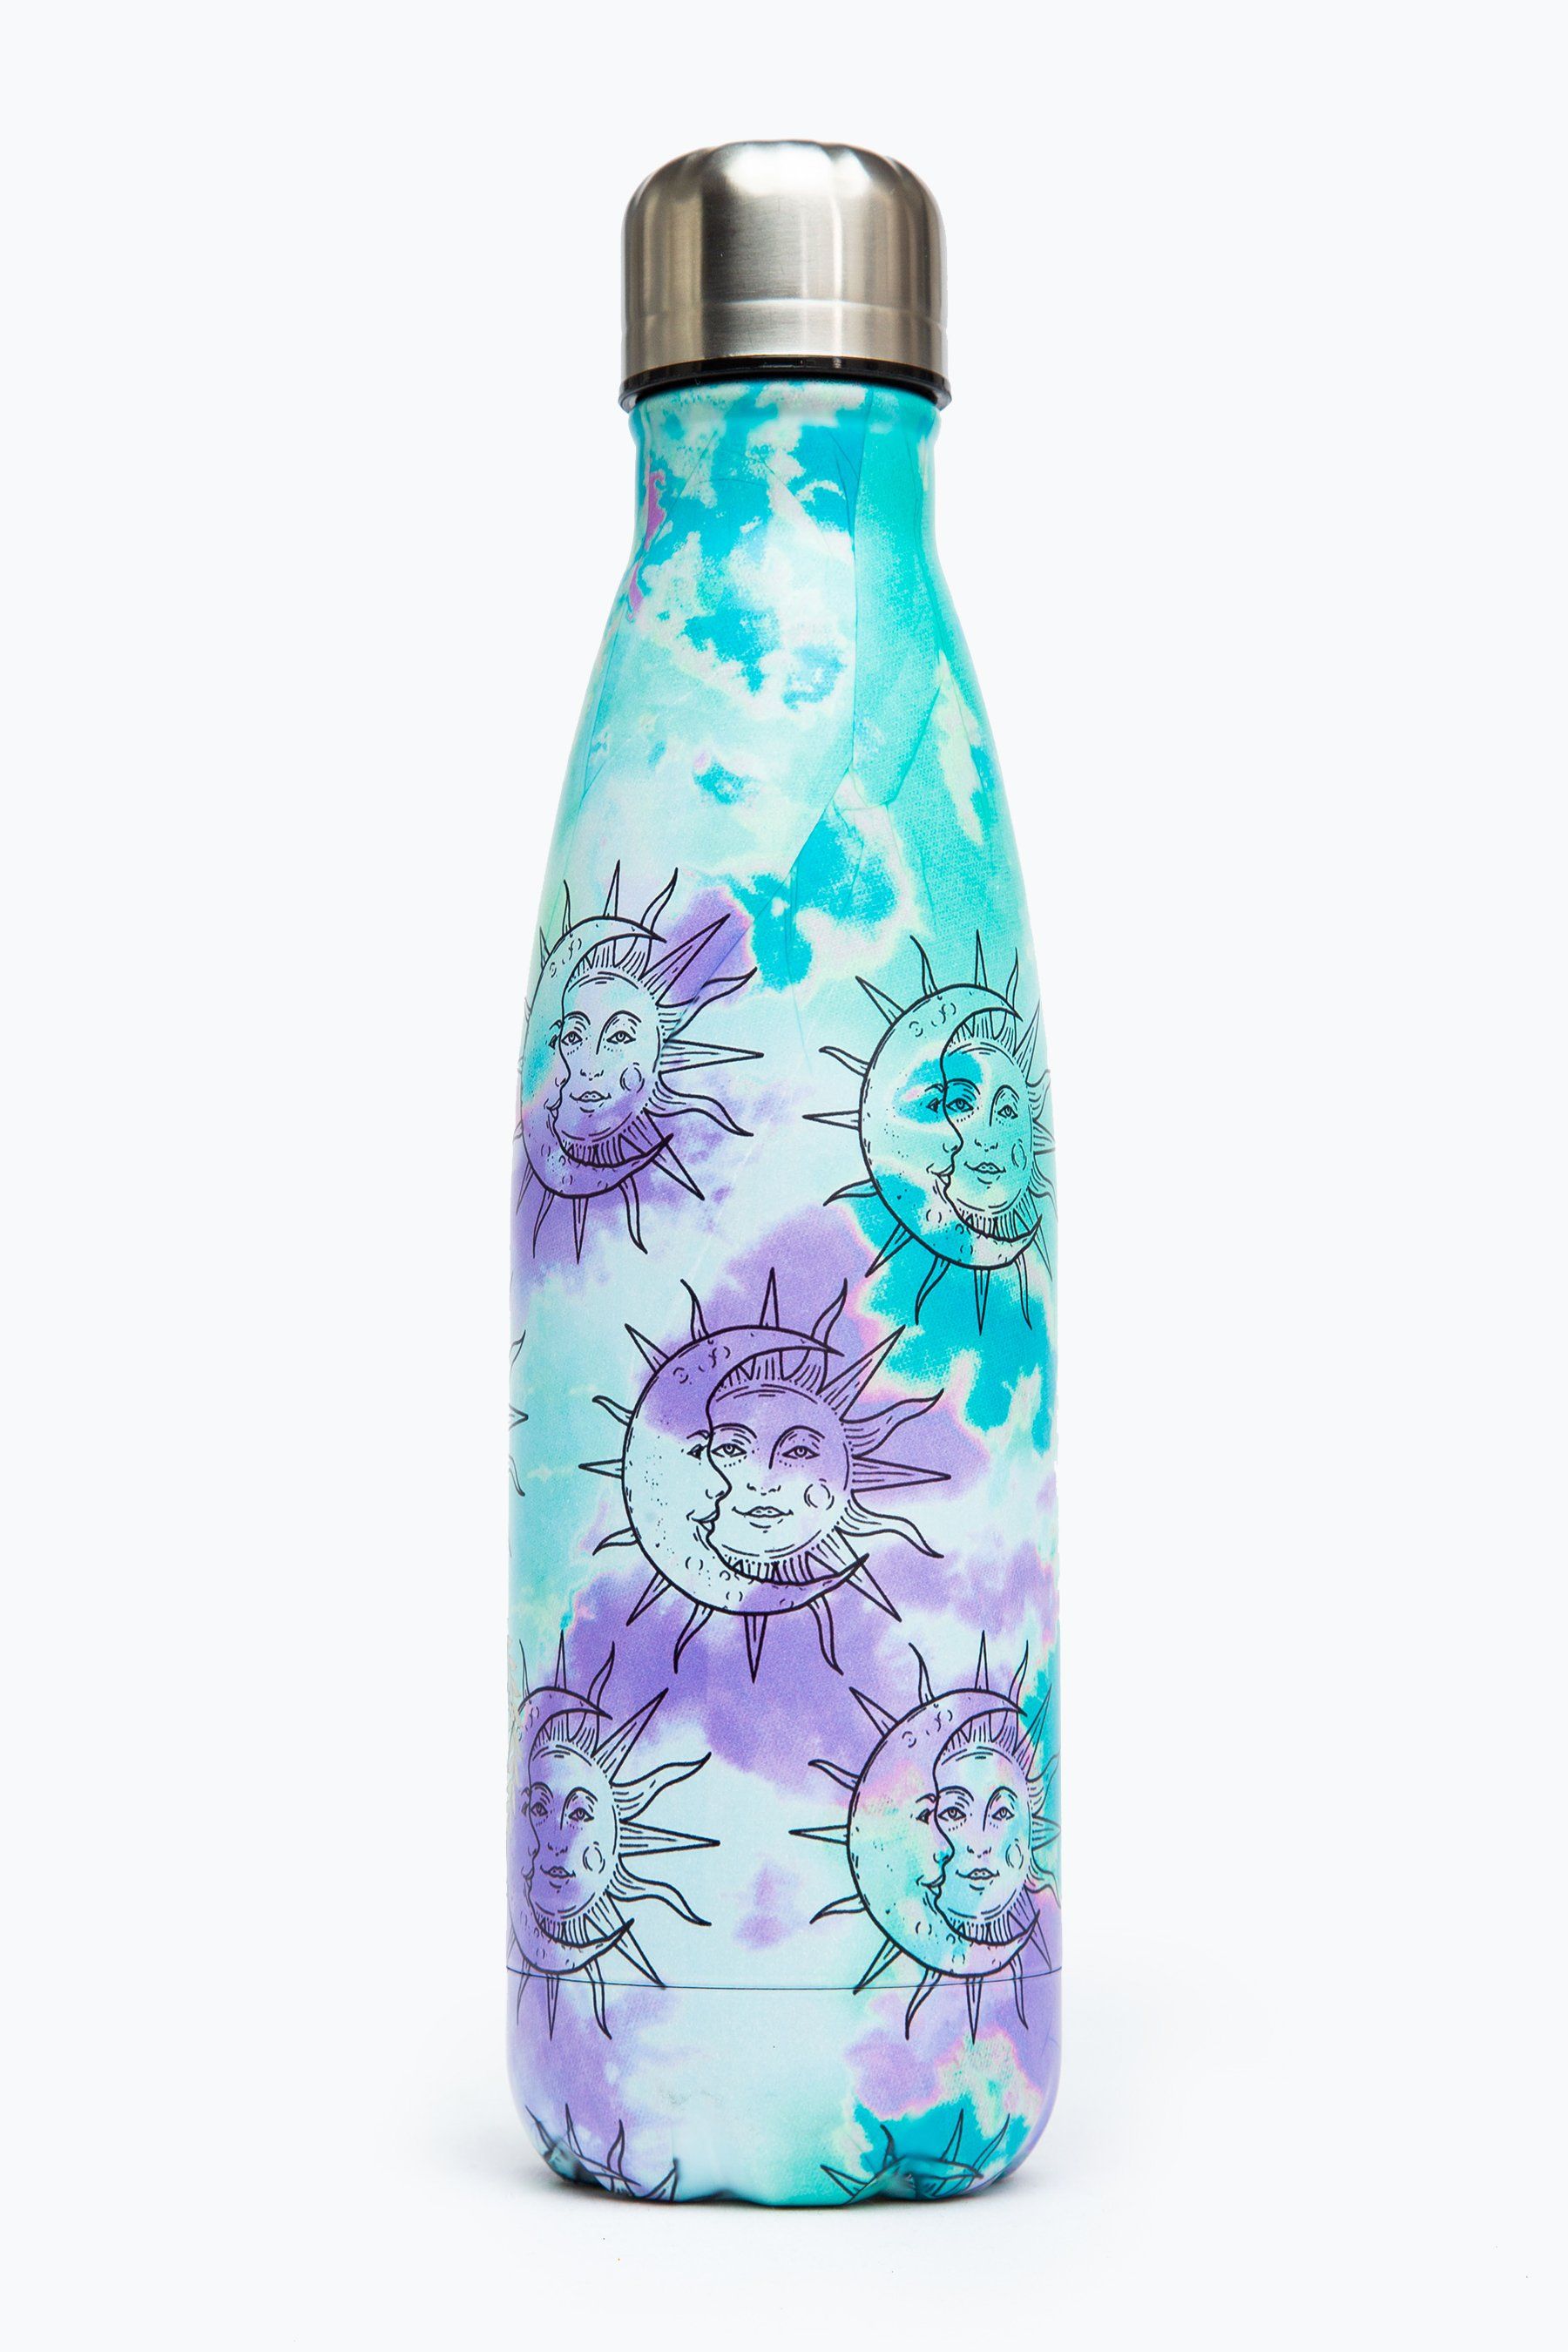 Meet the HYPE. Tie Dye Moon Metal Reusable Bottle, perfect for when you're on the go. Designed in Aluminium to ensure your water stays ice-cold and for chillier days, keeping your oat milk latte warm for longer. The design features a pastel mint and purple tie-dye base with an all-over psychic inspired moon overlay in a contrasting black. Finished with the iconic HYPE. crest logo in white on the front. Why not grab one of our lunch bags or backpacks with a bottle holder to complete the look, we suggest grabbing the matching set.